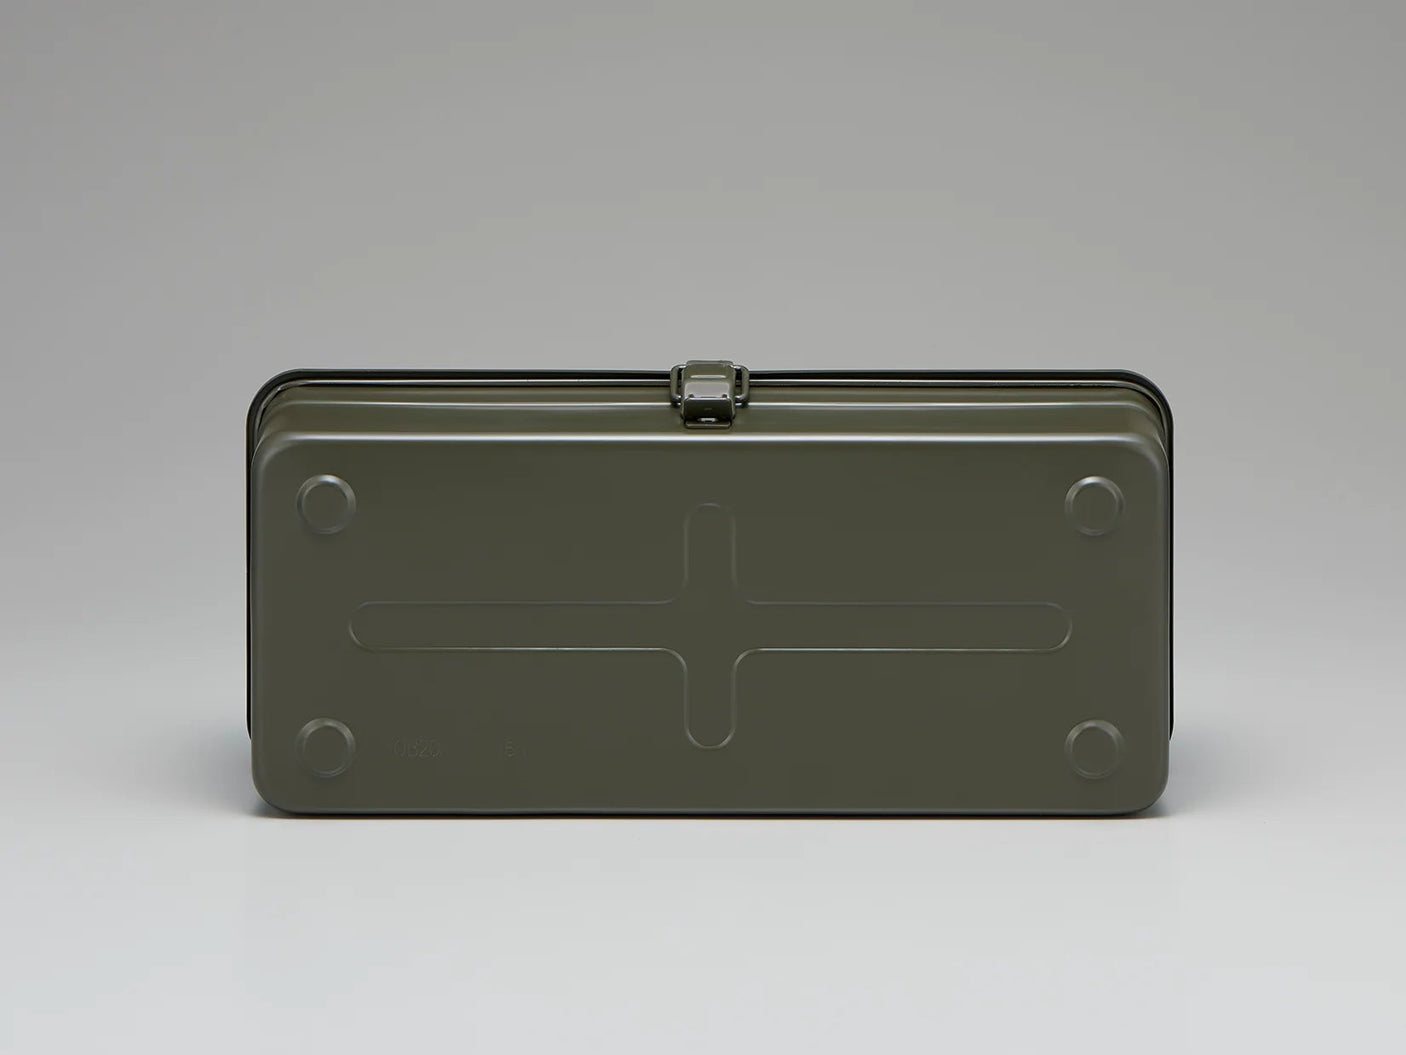 TOYO Camber-top Toolbox Y-350 MG (Moss green) - Tool Bags Boxes and Rolls - Japanese Tools Australia